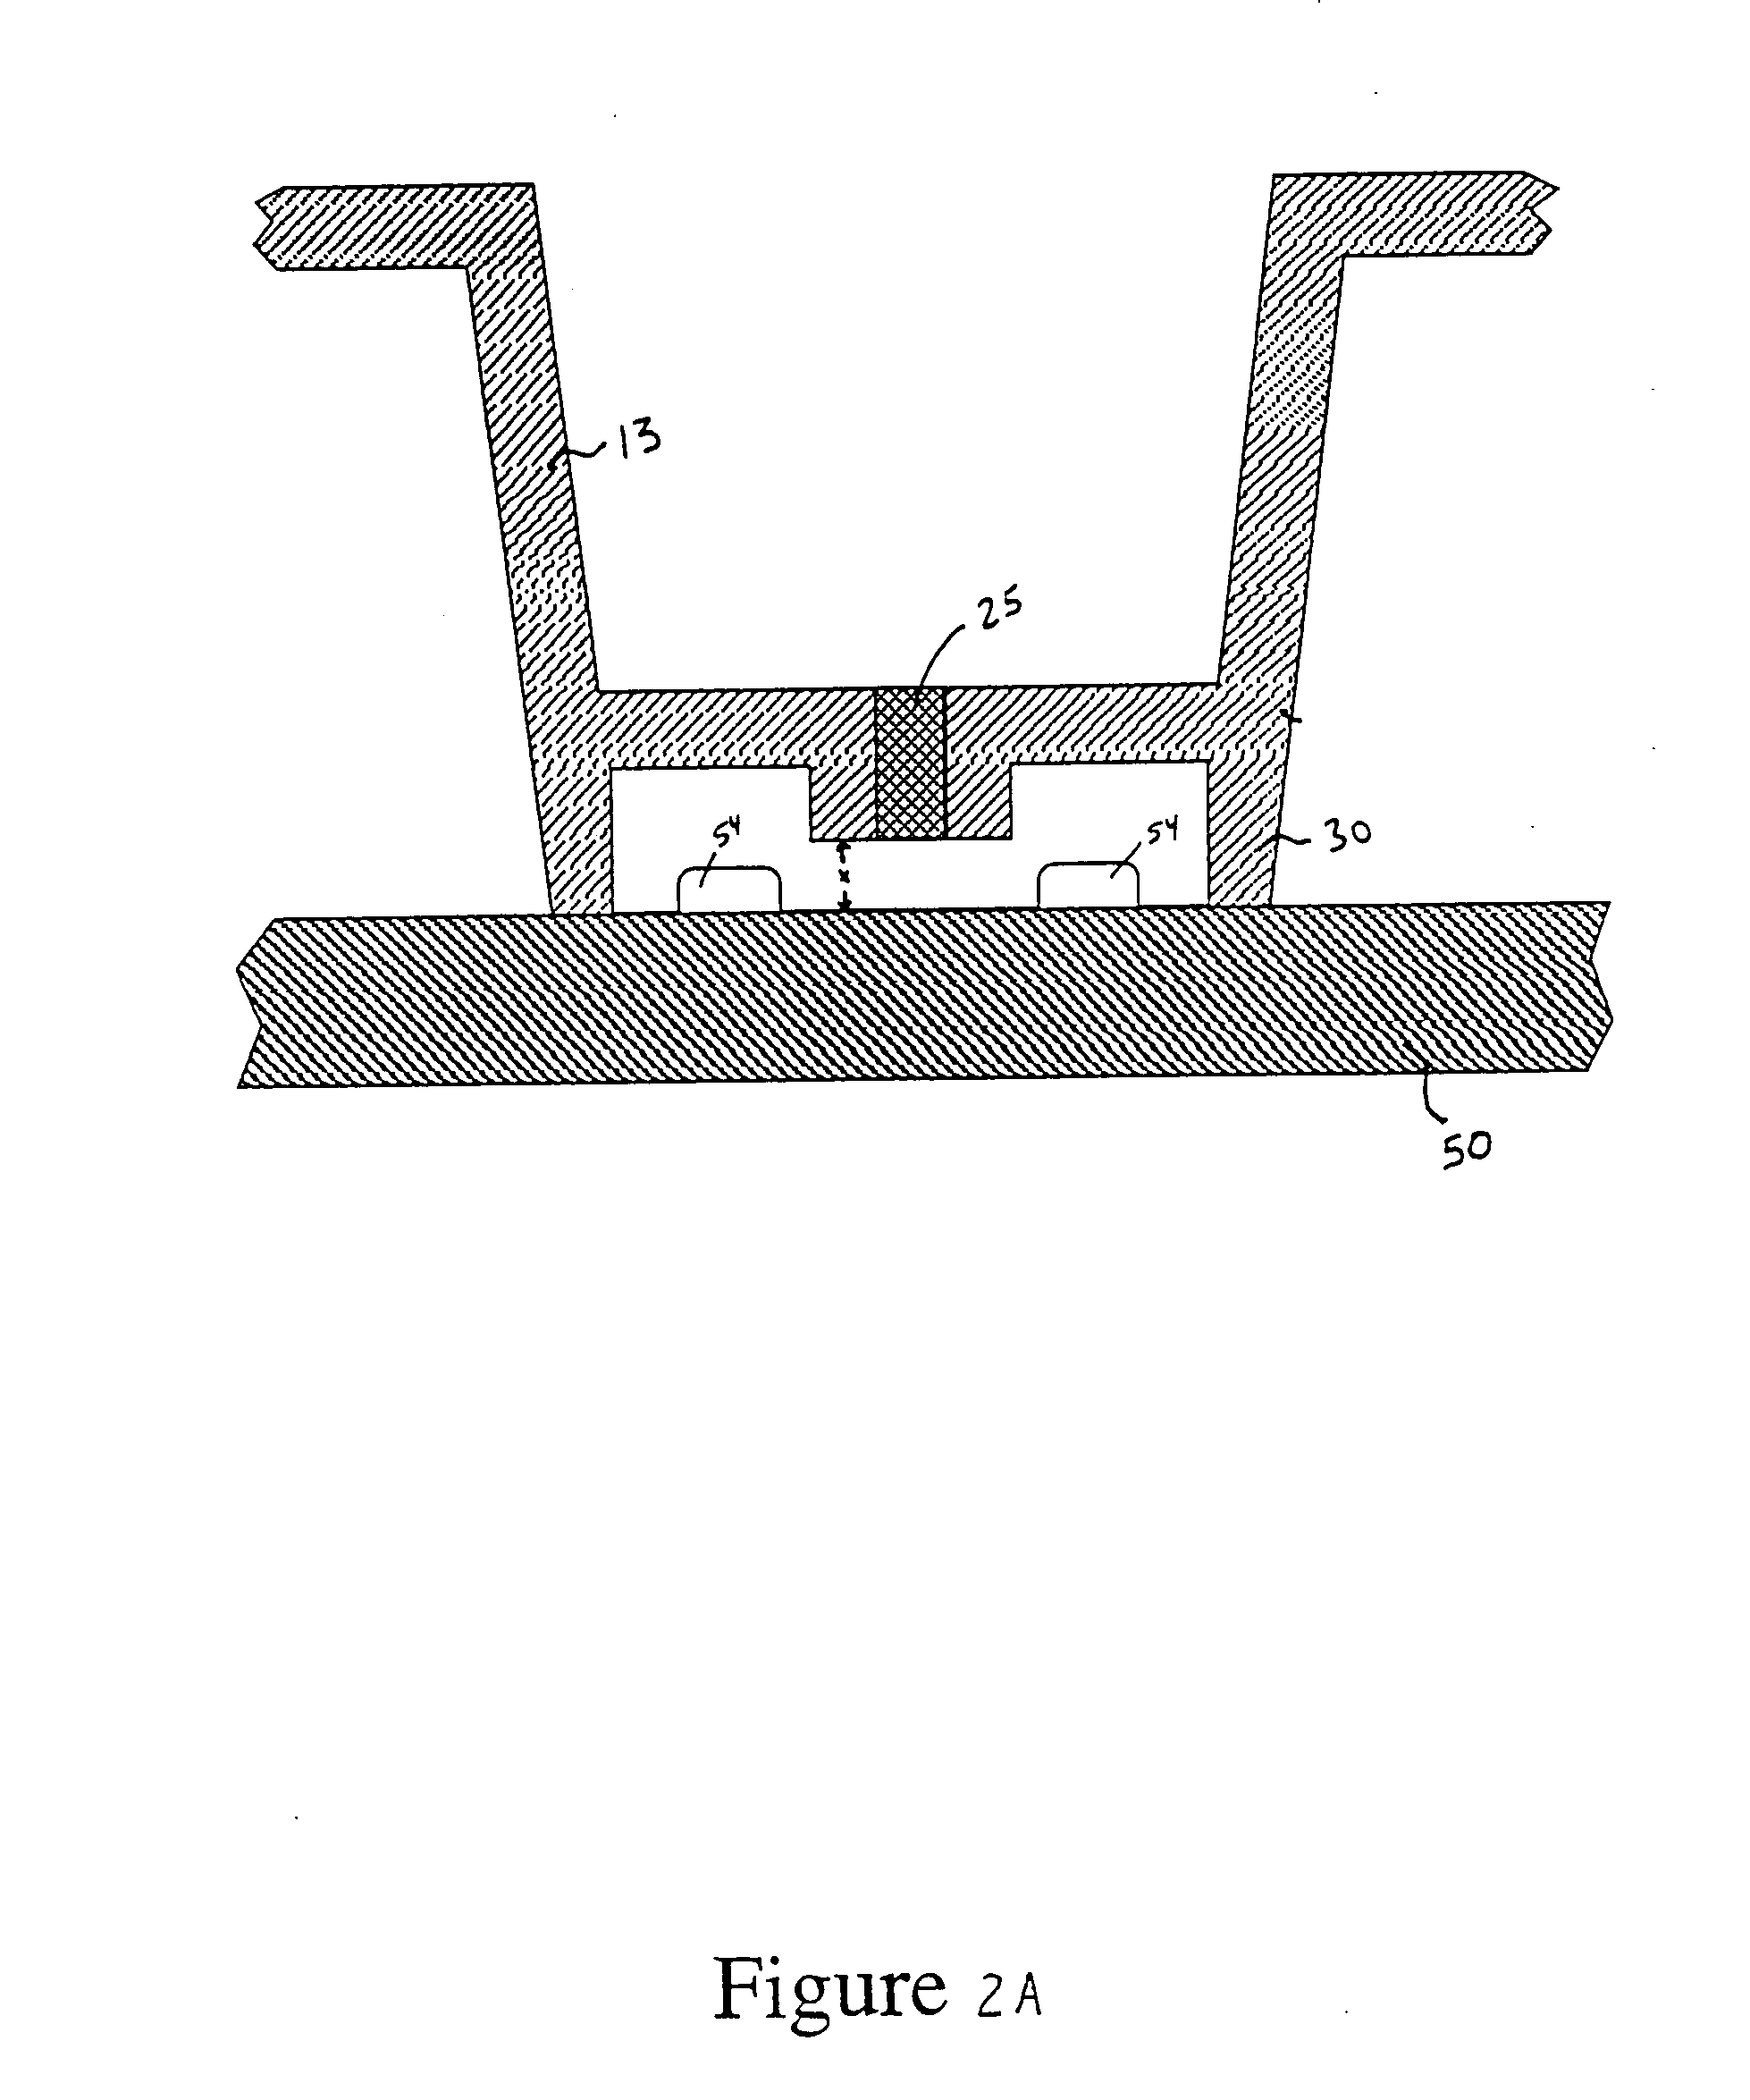 Apparatus and method for sample preparation and direct spotting eluants onto a MALDI-TOF target